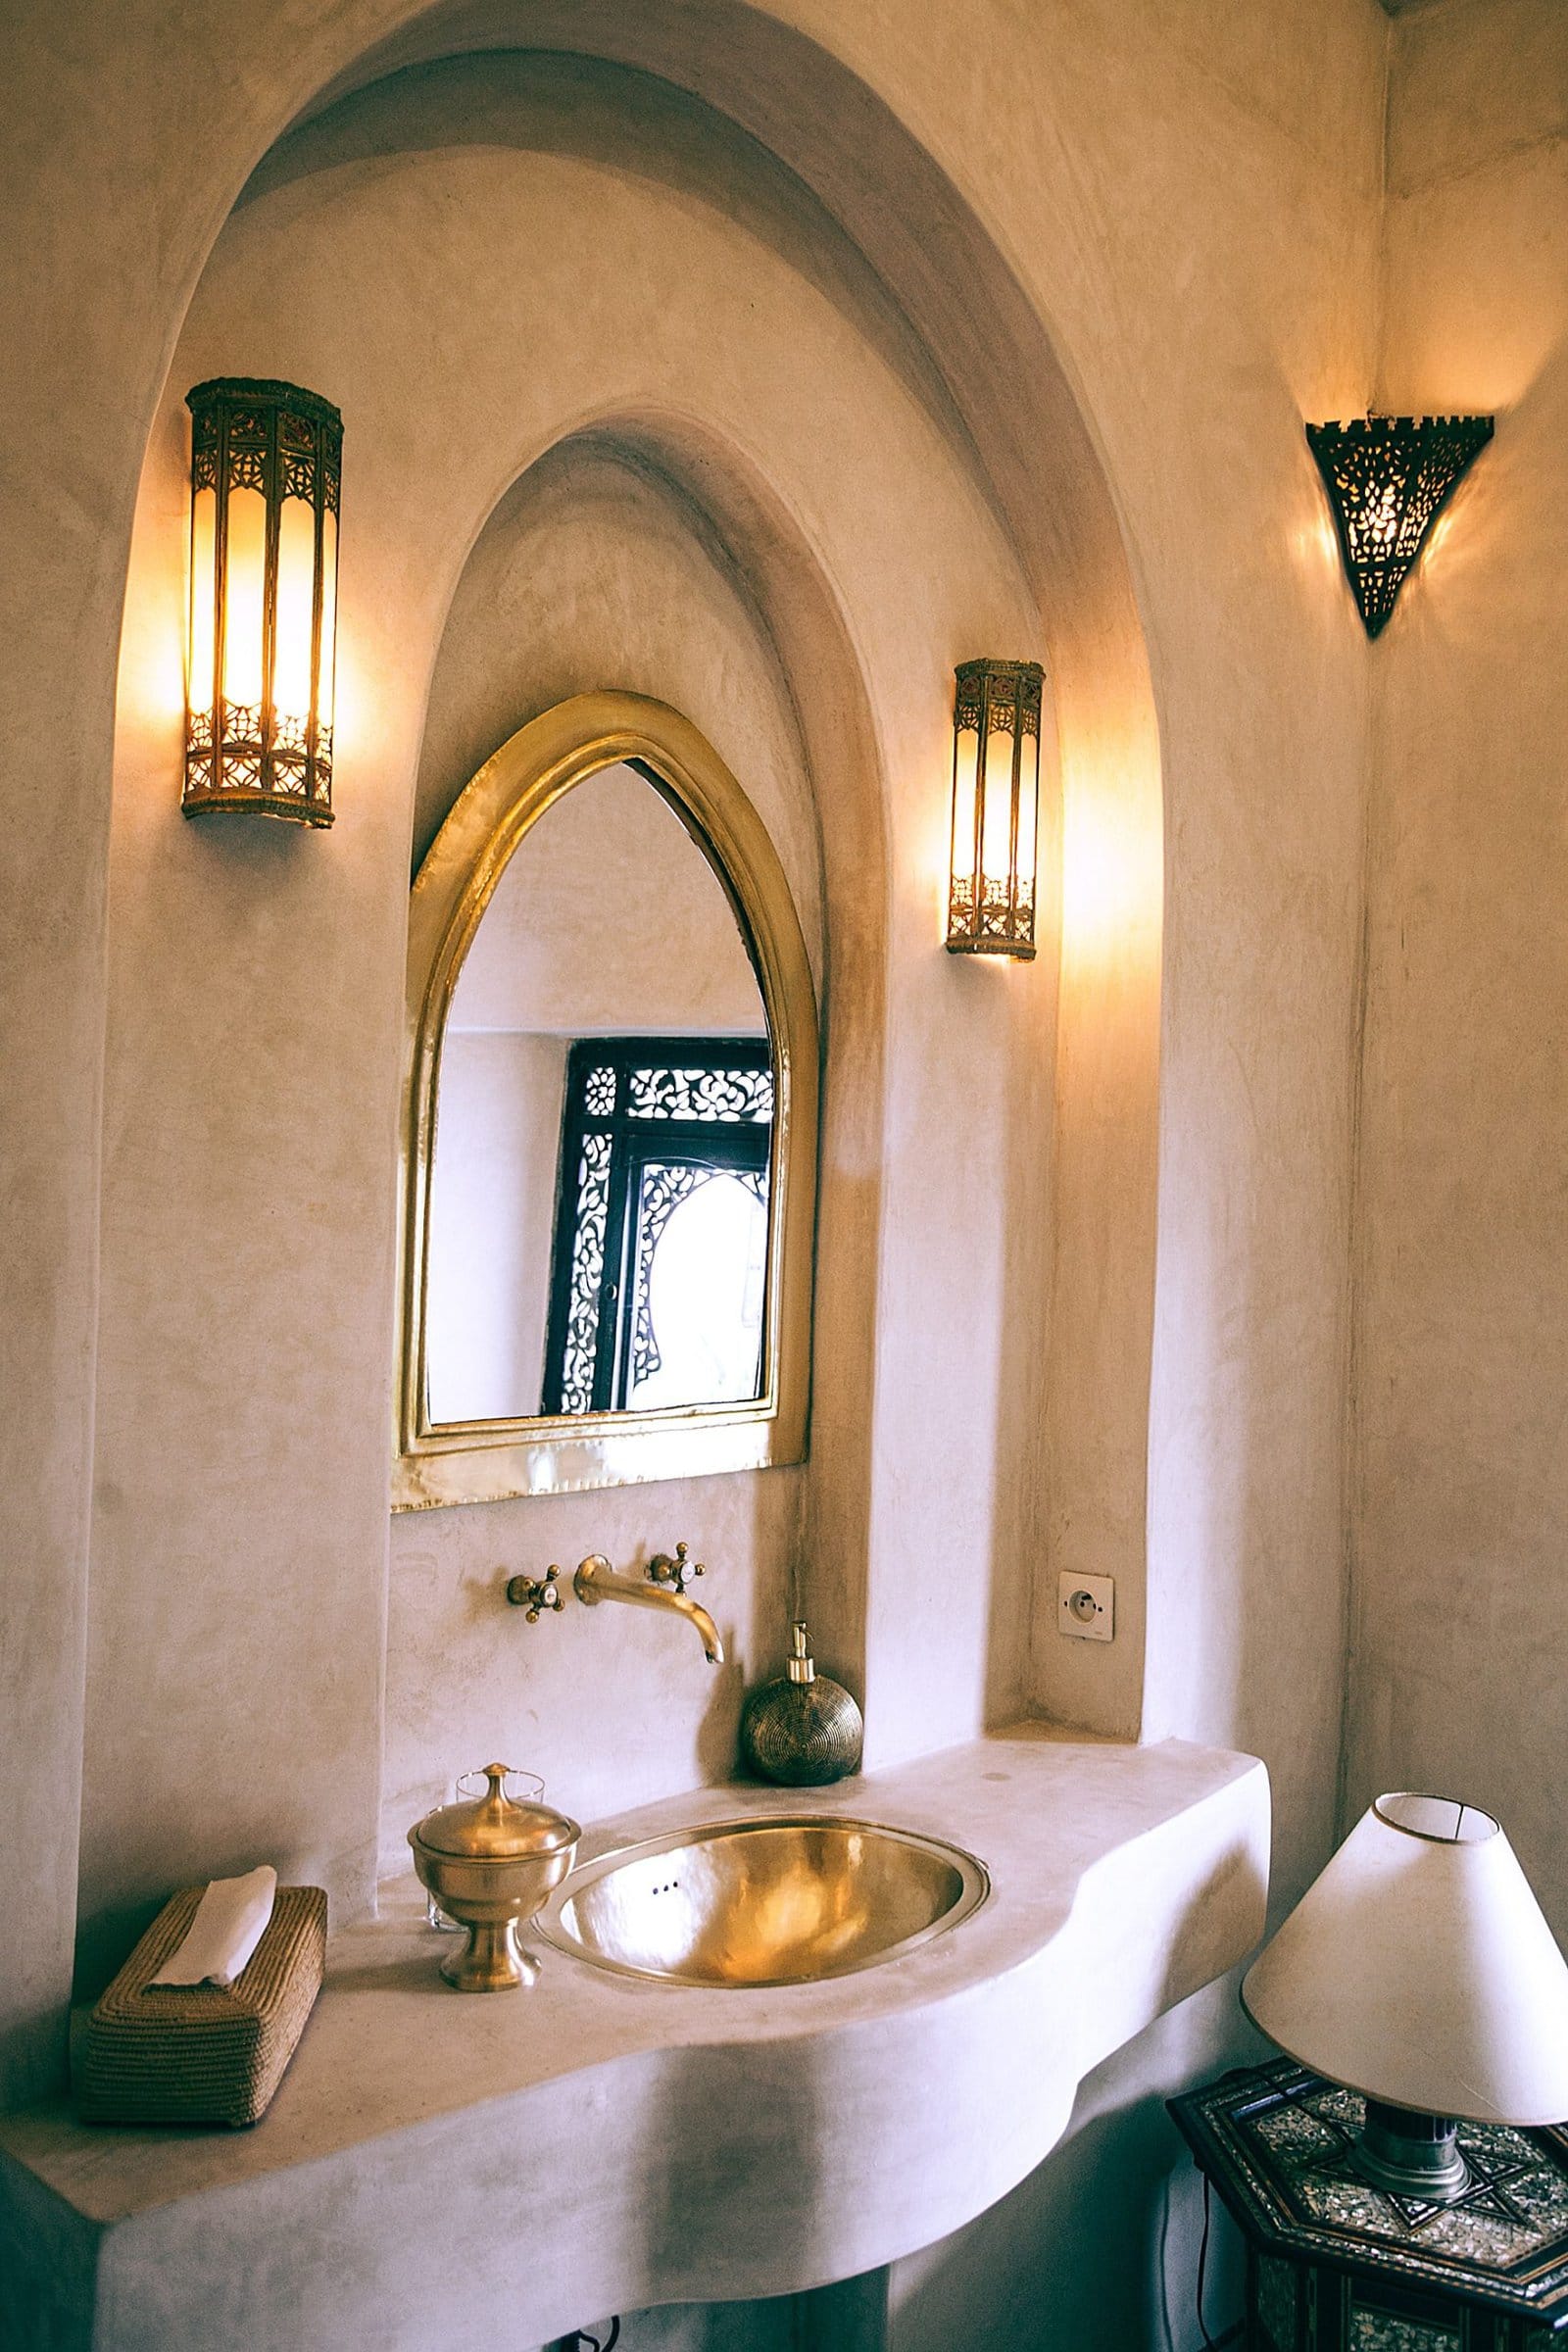  Moroccan Light Fixtures with Satin Brushed Faucet scaled